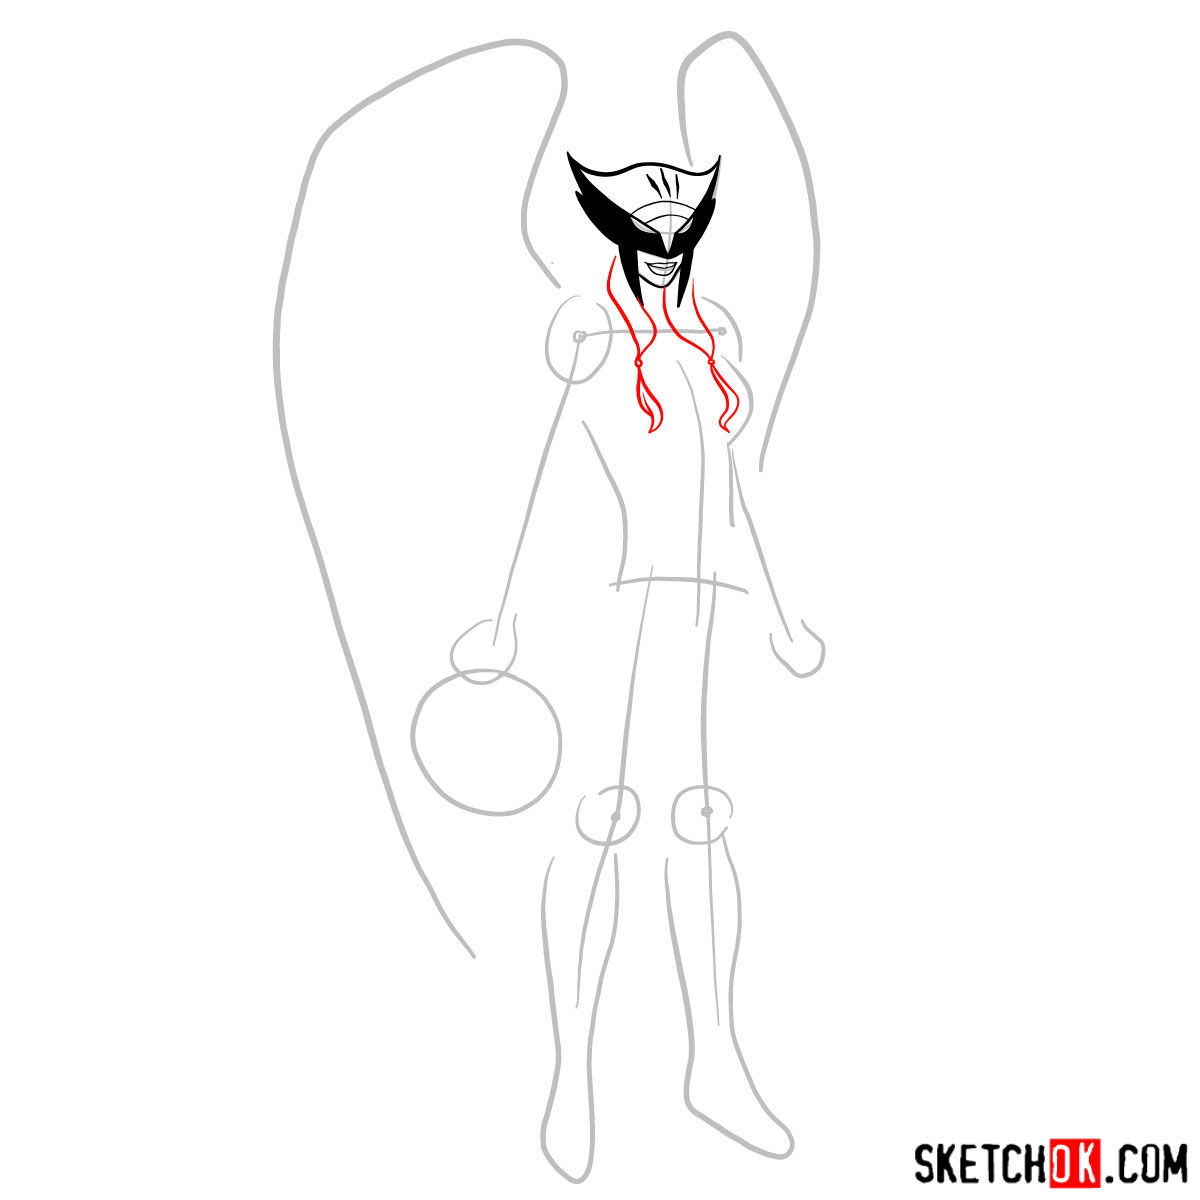 How to draw Hawkgirl DC superheroine - step 05